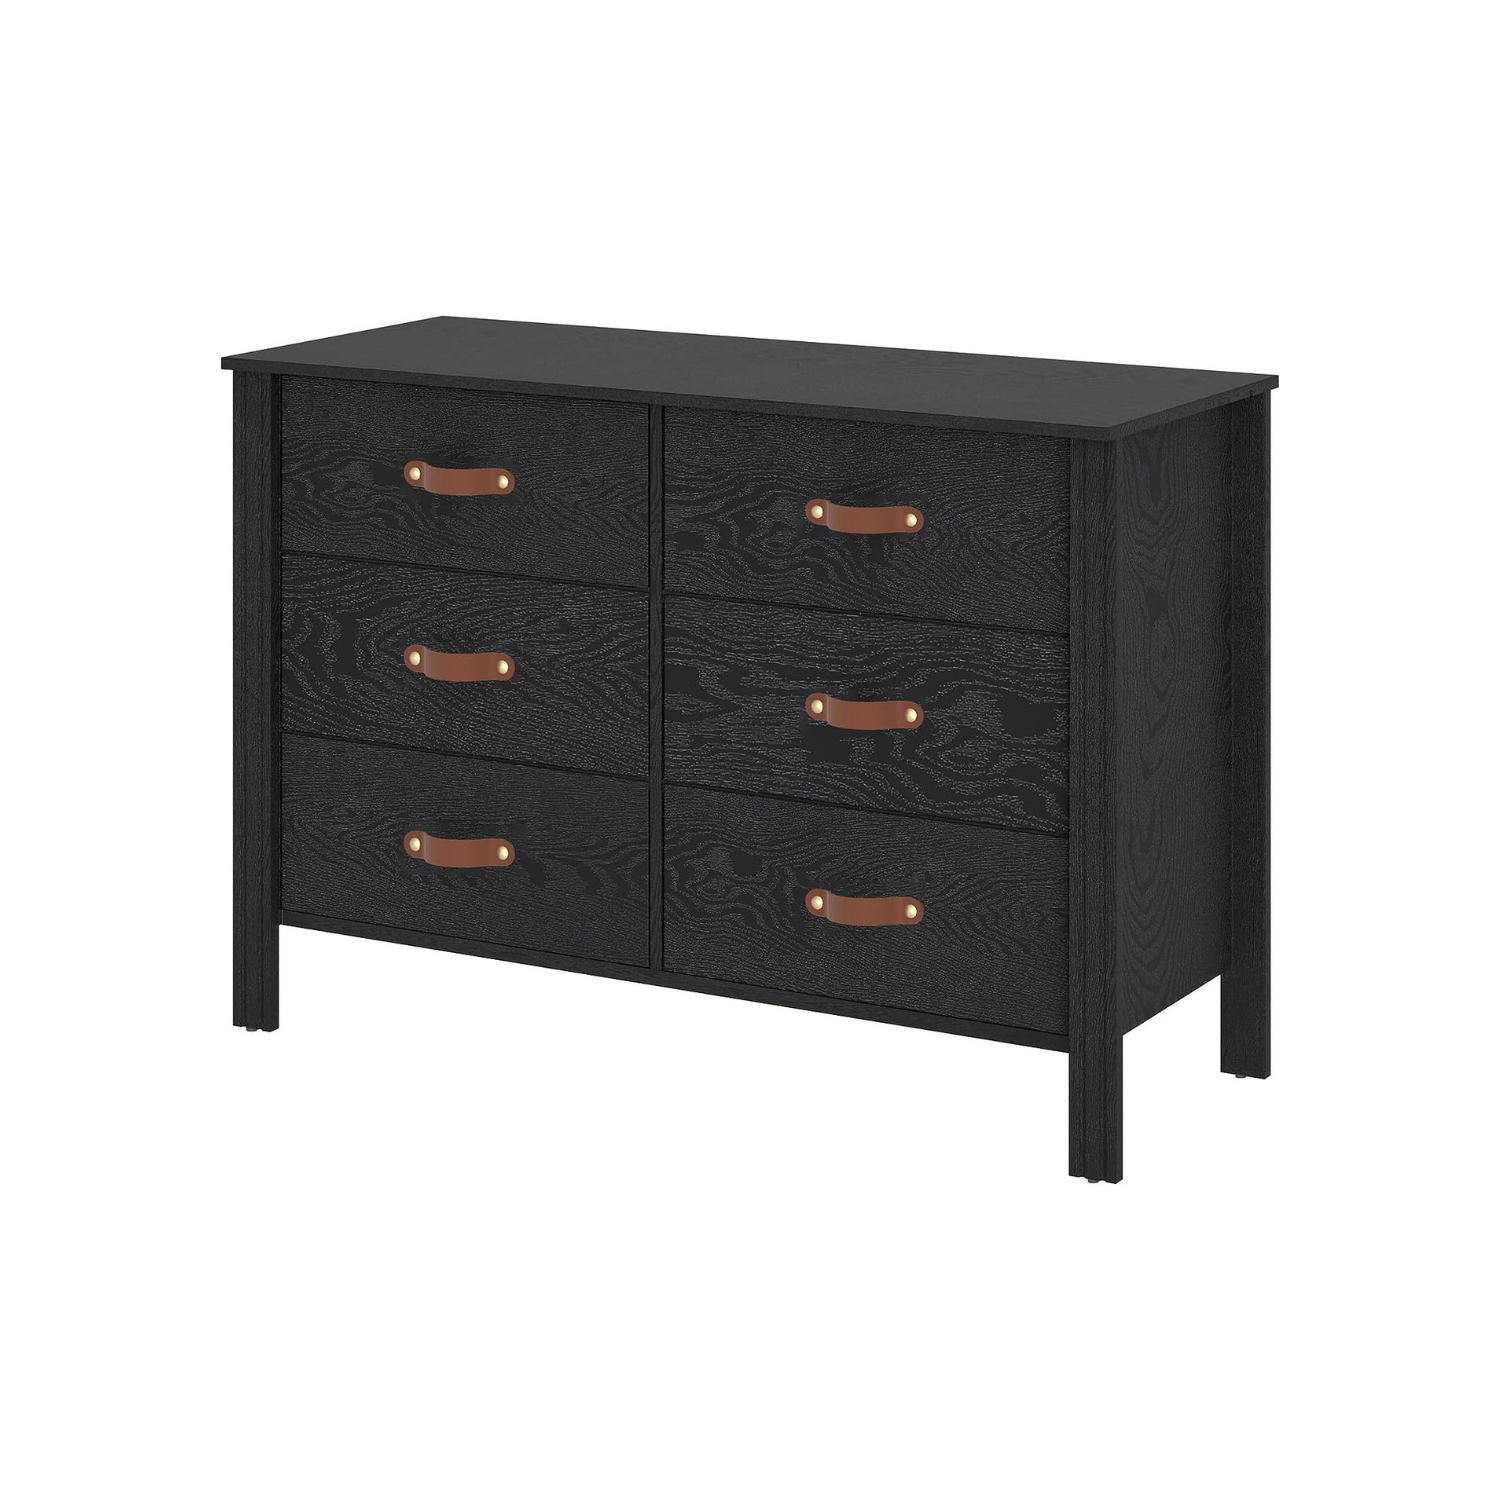 WAMPAT Dresser TV Stand, Wood Entertainment Center with 6 Fabric Drawers, Chest of Drawers for Living Room, Bedroom, Hallway